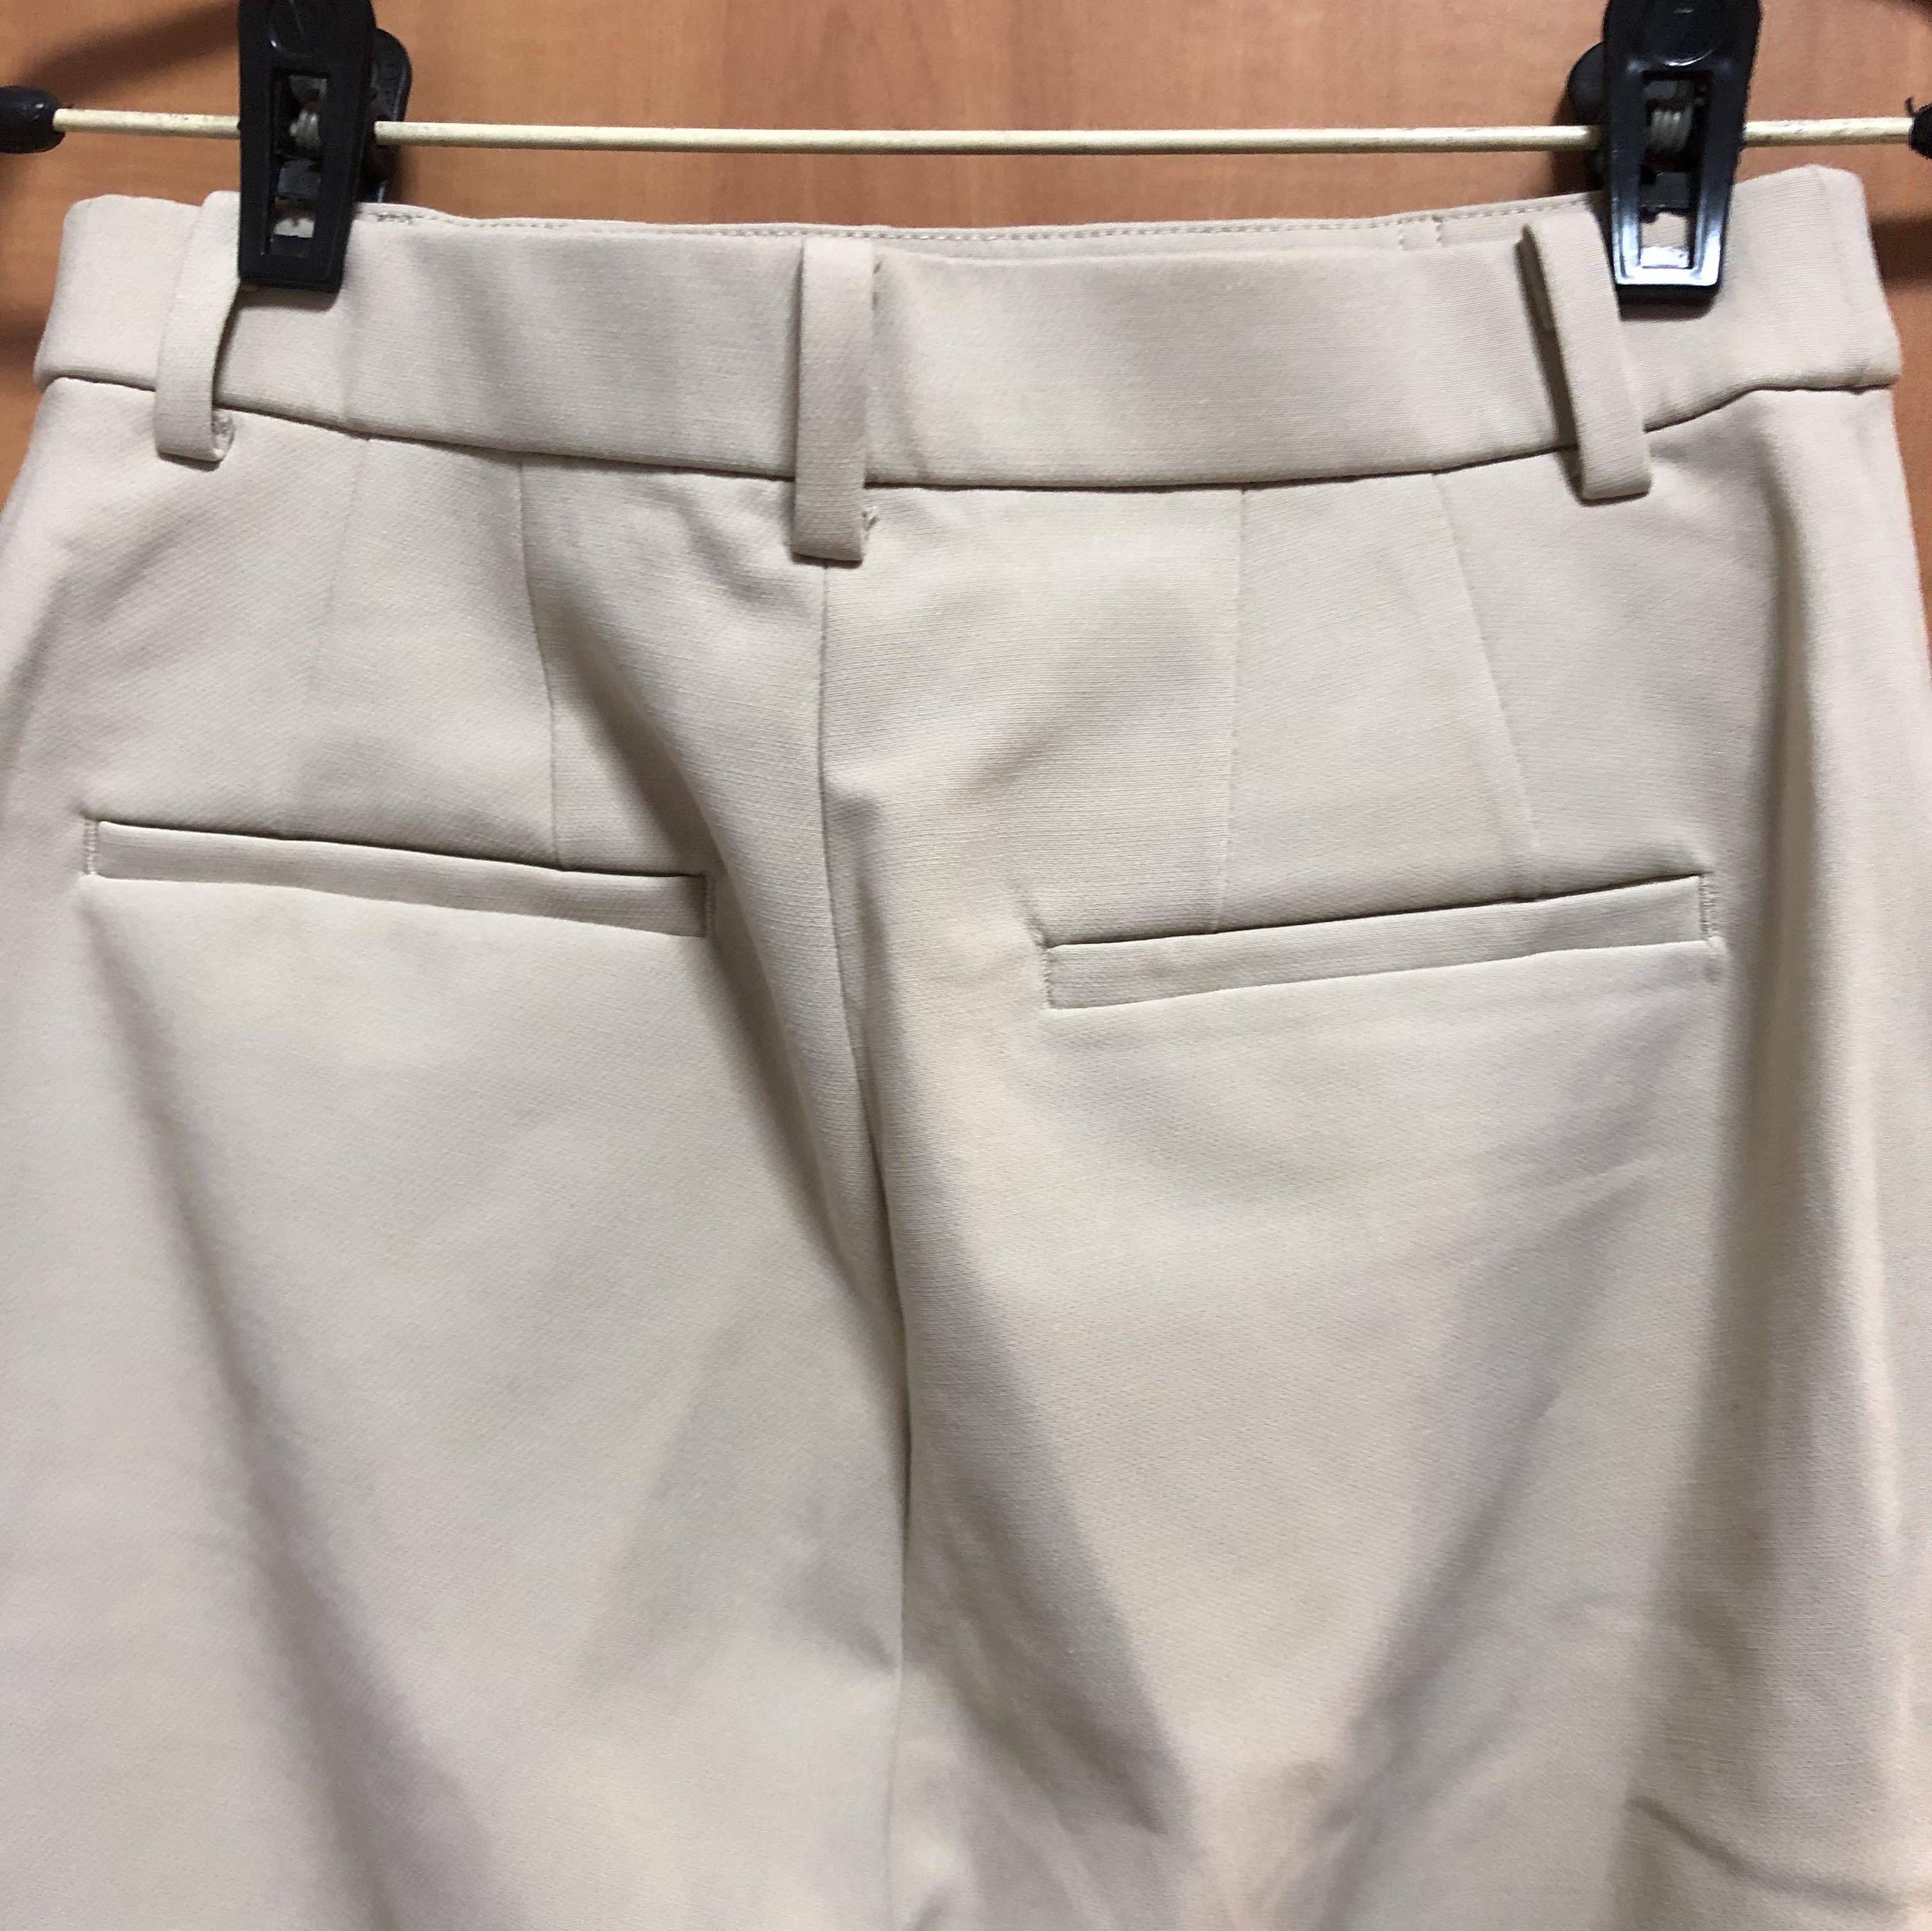 Uniqlo EZY Flare Ankle Pants in Beige, Women's Fashion, Bottoms, Other ...